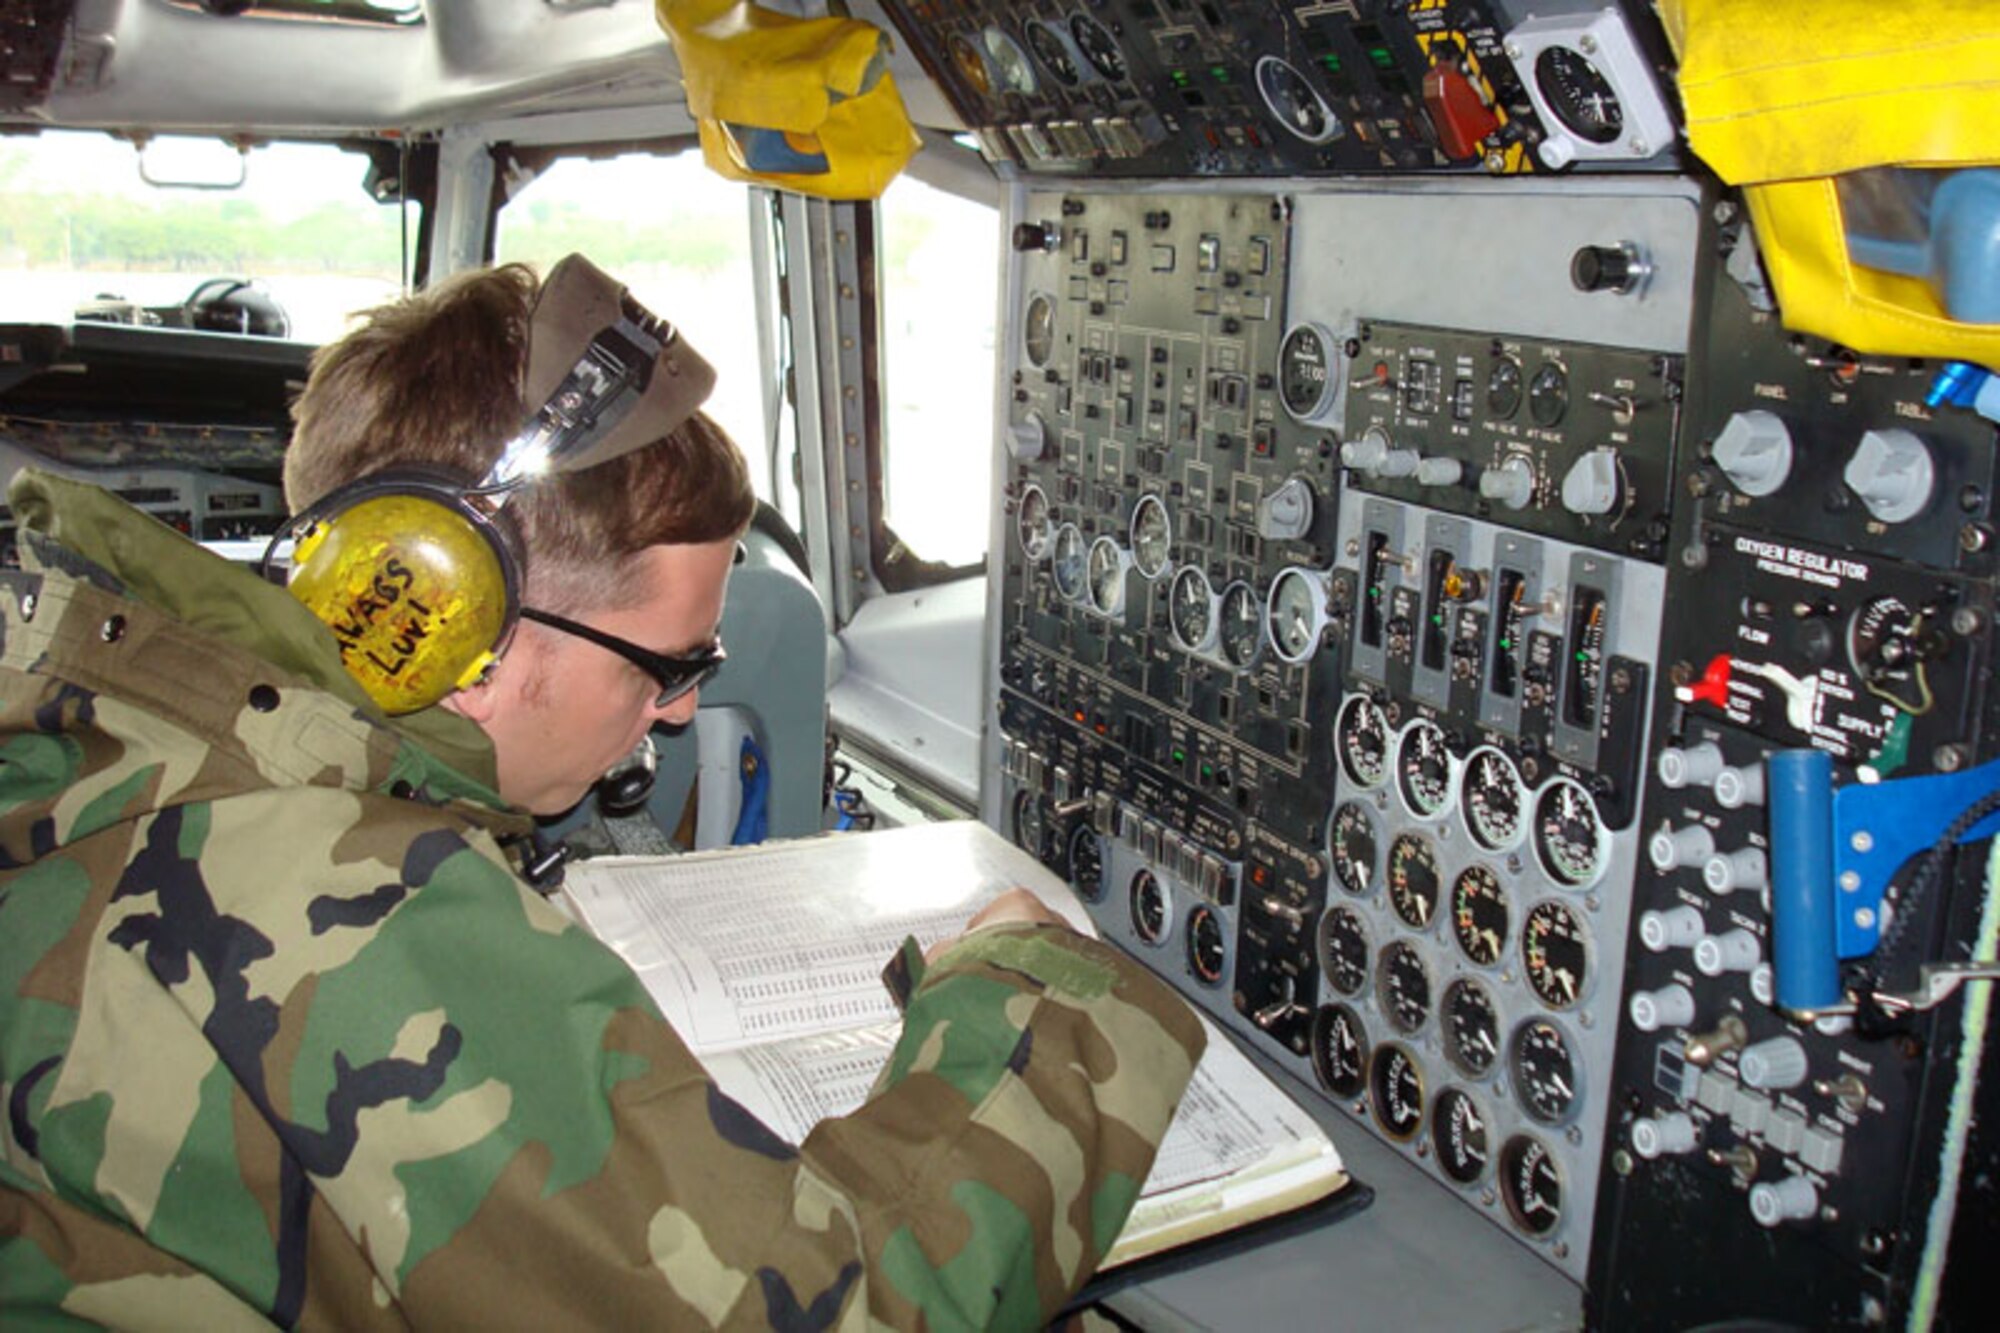 Master Sgt. Zerian Moore, lead production superintendent of the 961st Airborne Air Control Squadron (AACS), of Kadena Air Base, Japan, reviews electronic technical orders, a part of post-flight maintenance with his squadron maintainers after an E-3 Sentry (AWACS) landed. Aircrew from the 961st and 962nd (Elmendorf Air Force Base, Alaska) AACS  worked together to perform a quick turnaround to ground-refuel an E-3 Sentry and still complete a mission Feb. 3. (U.S. Air Force photo/Capt. Renee H. Lee)